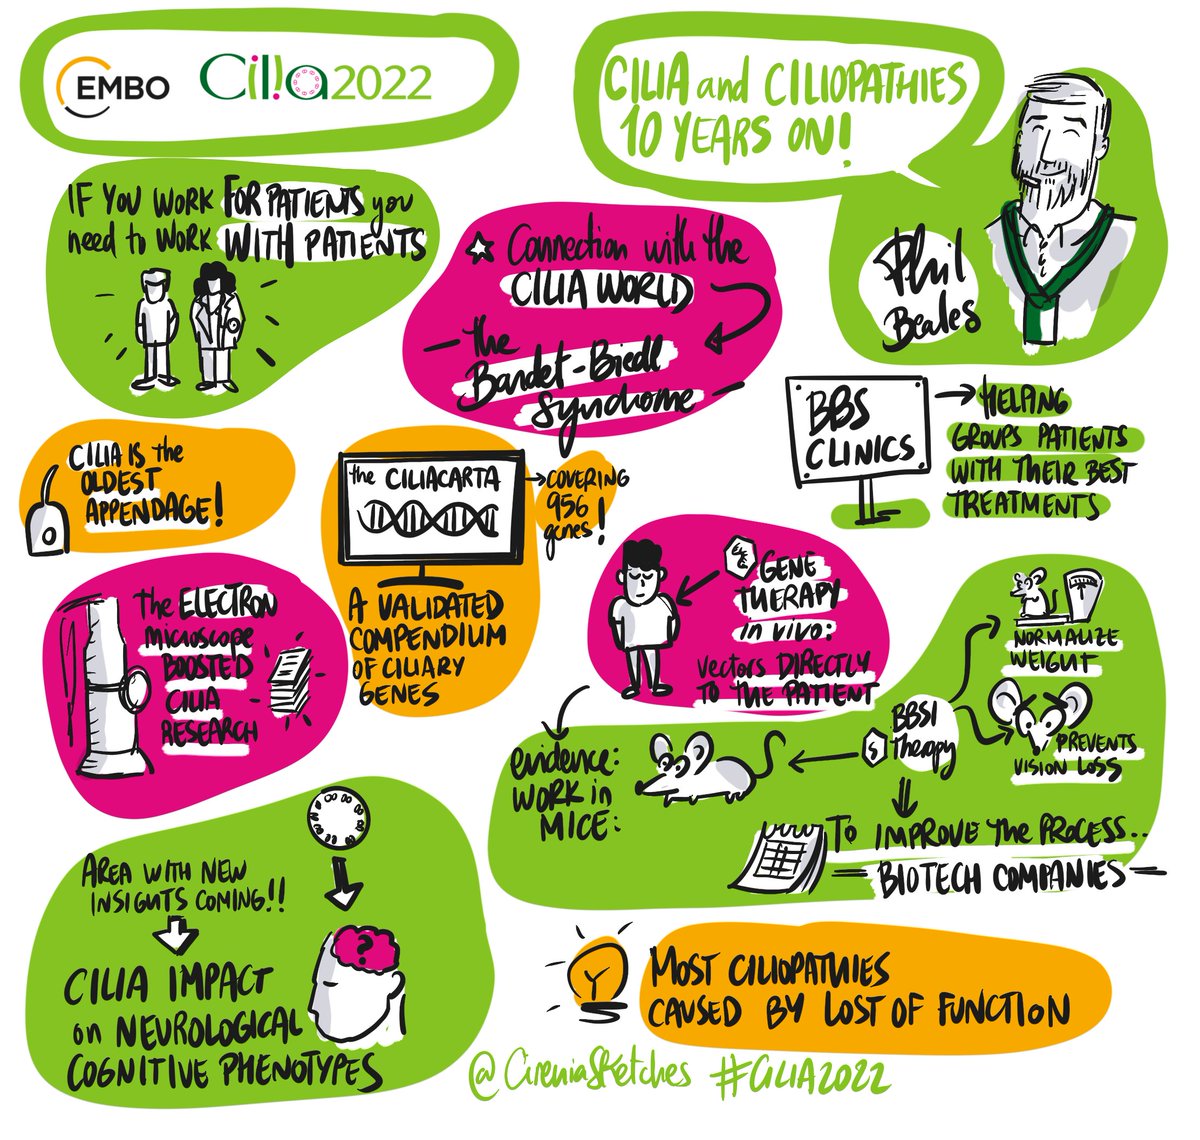 Phenomenal graphic @CireniaSketches on our kick-ass keynote Phil Beales reflecting on the European #Cilia Meeting 10 yrs on- we have come a long way, baby! #raredisease #ciliopathies #patientvoice #BBS @CiliaAlliance More great things to come- what are you waiting for? #cilia2022